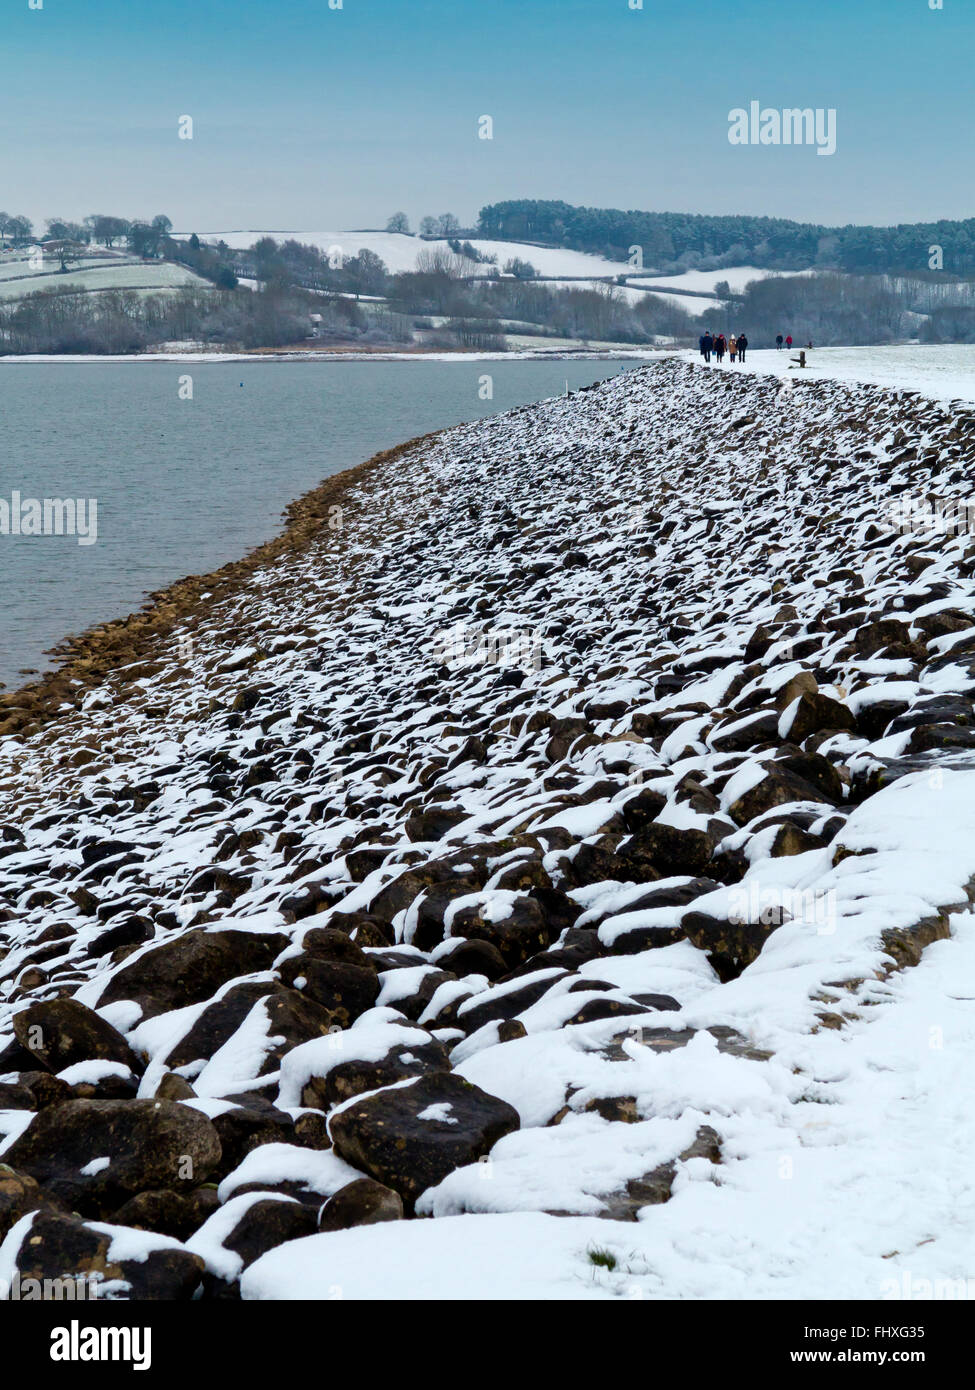 Winter scene at Carsington Water a reservoir operated by Severn Trent Water near Matlock in Derbyshire Dales Peak District UK Stock Photo